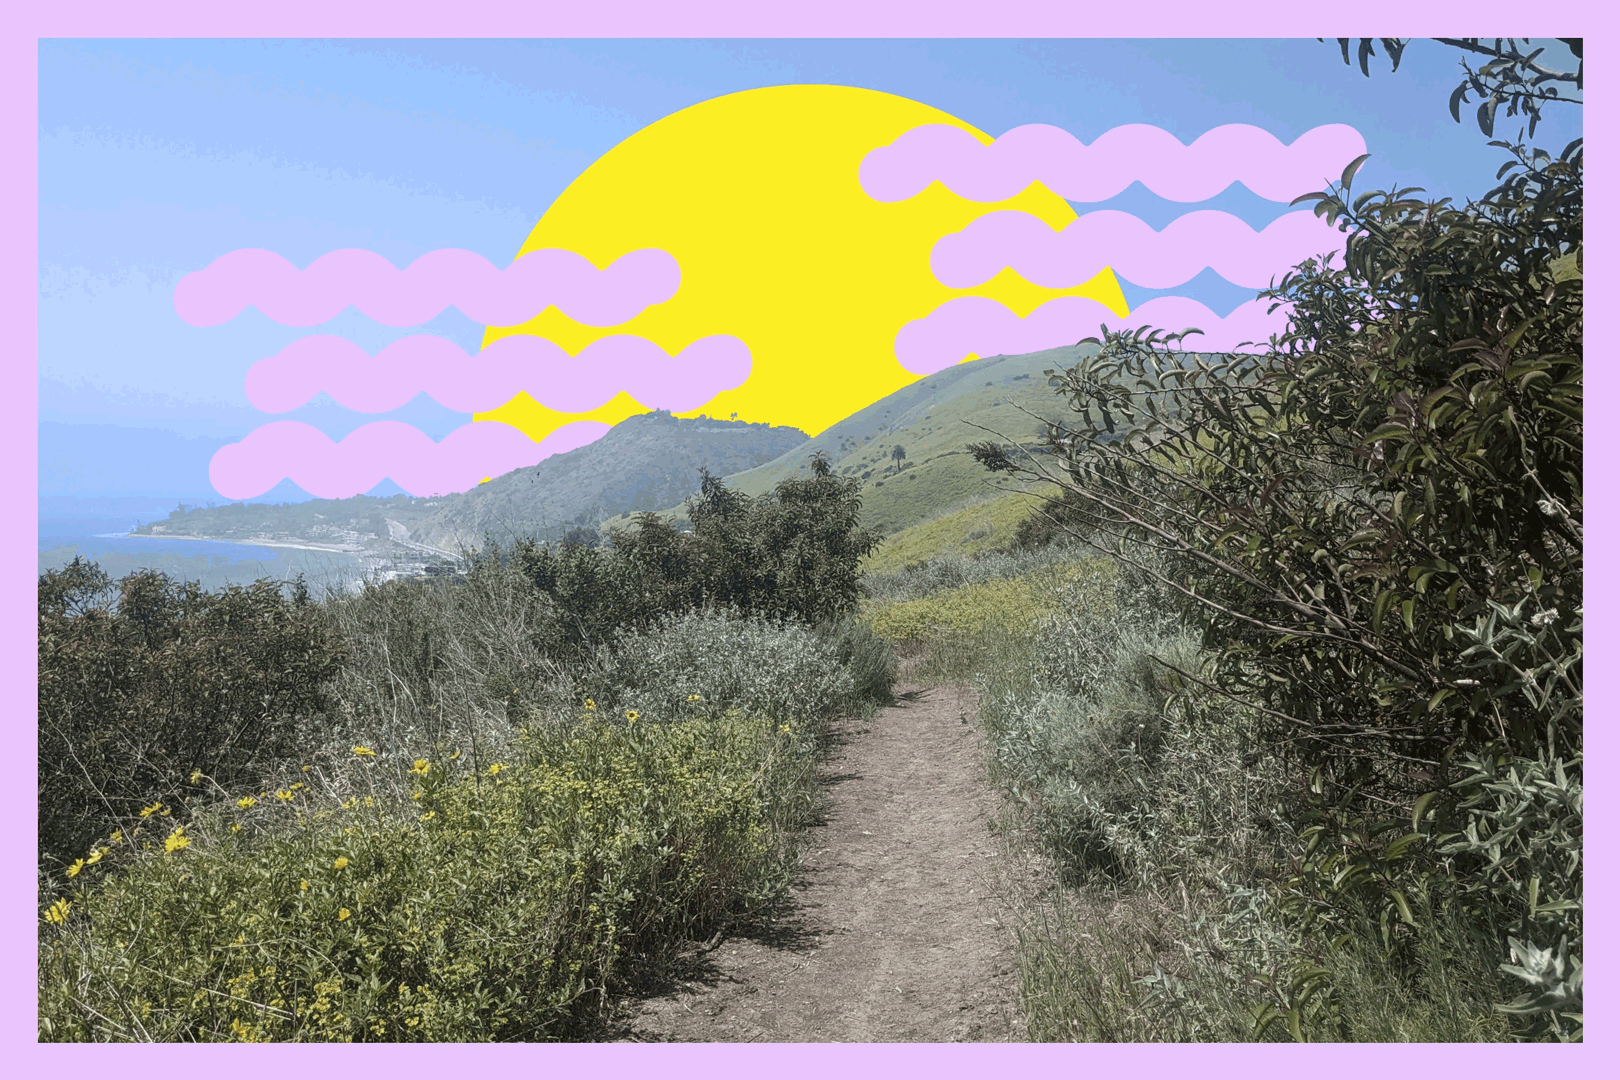 A dirt path leads to hills and the sea. An illustrated yellow sun and two animated waves are set behind the hills.